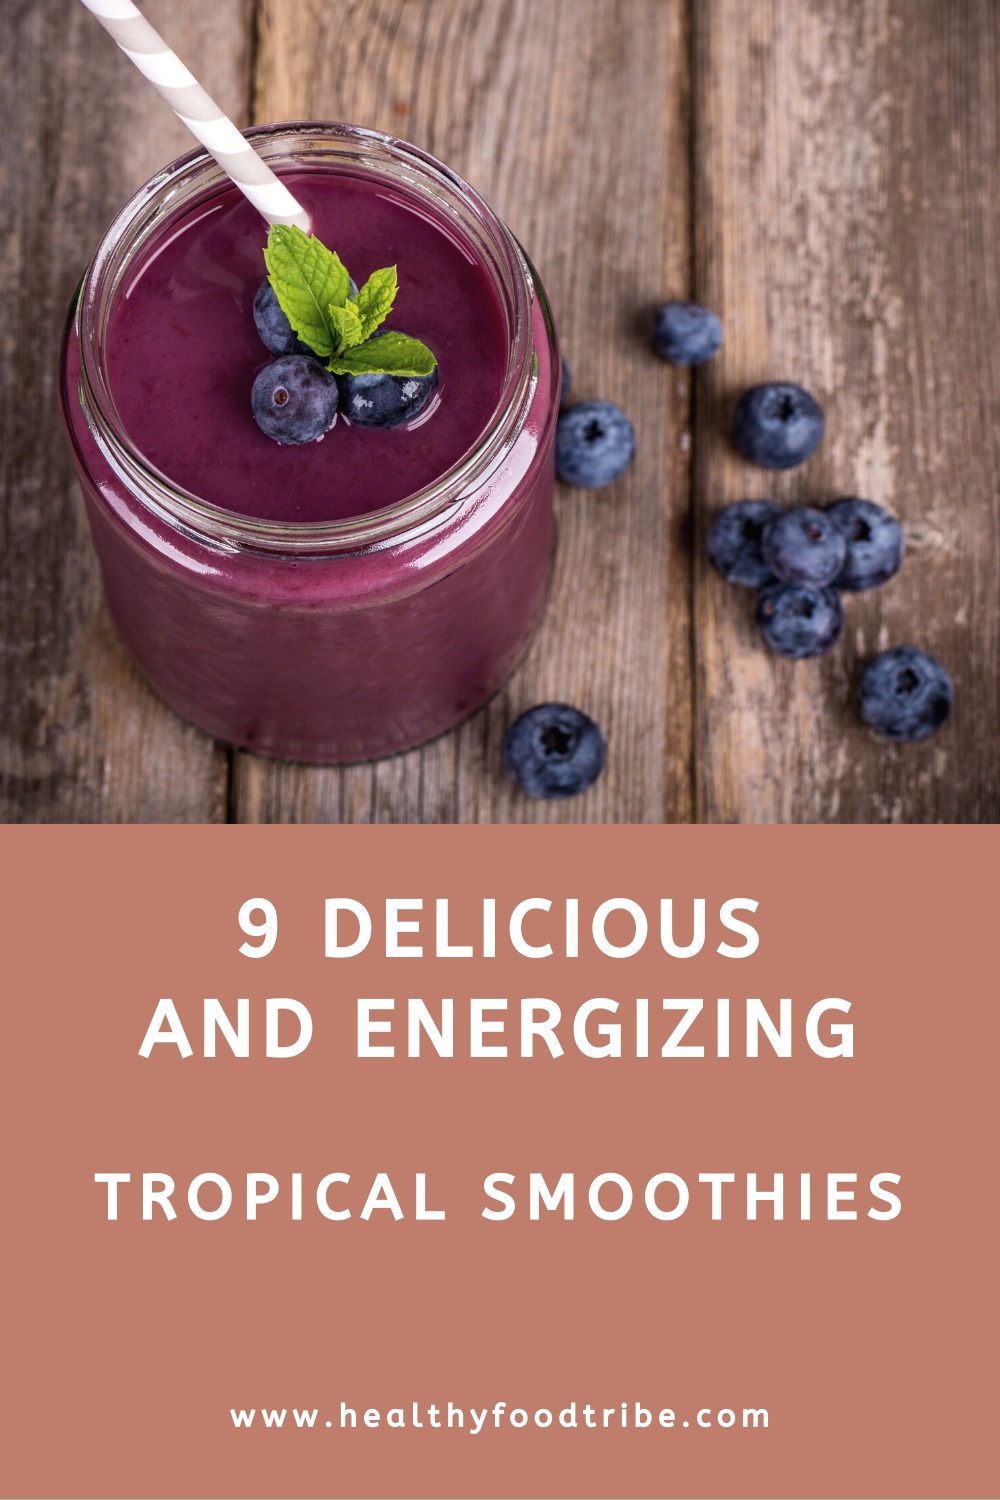 9 Delicious tropical smoothies